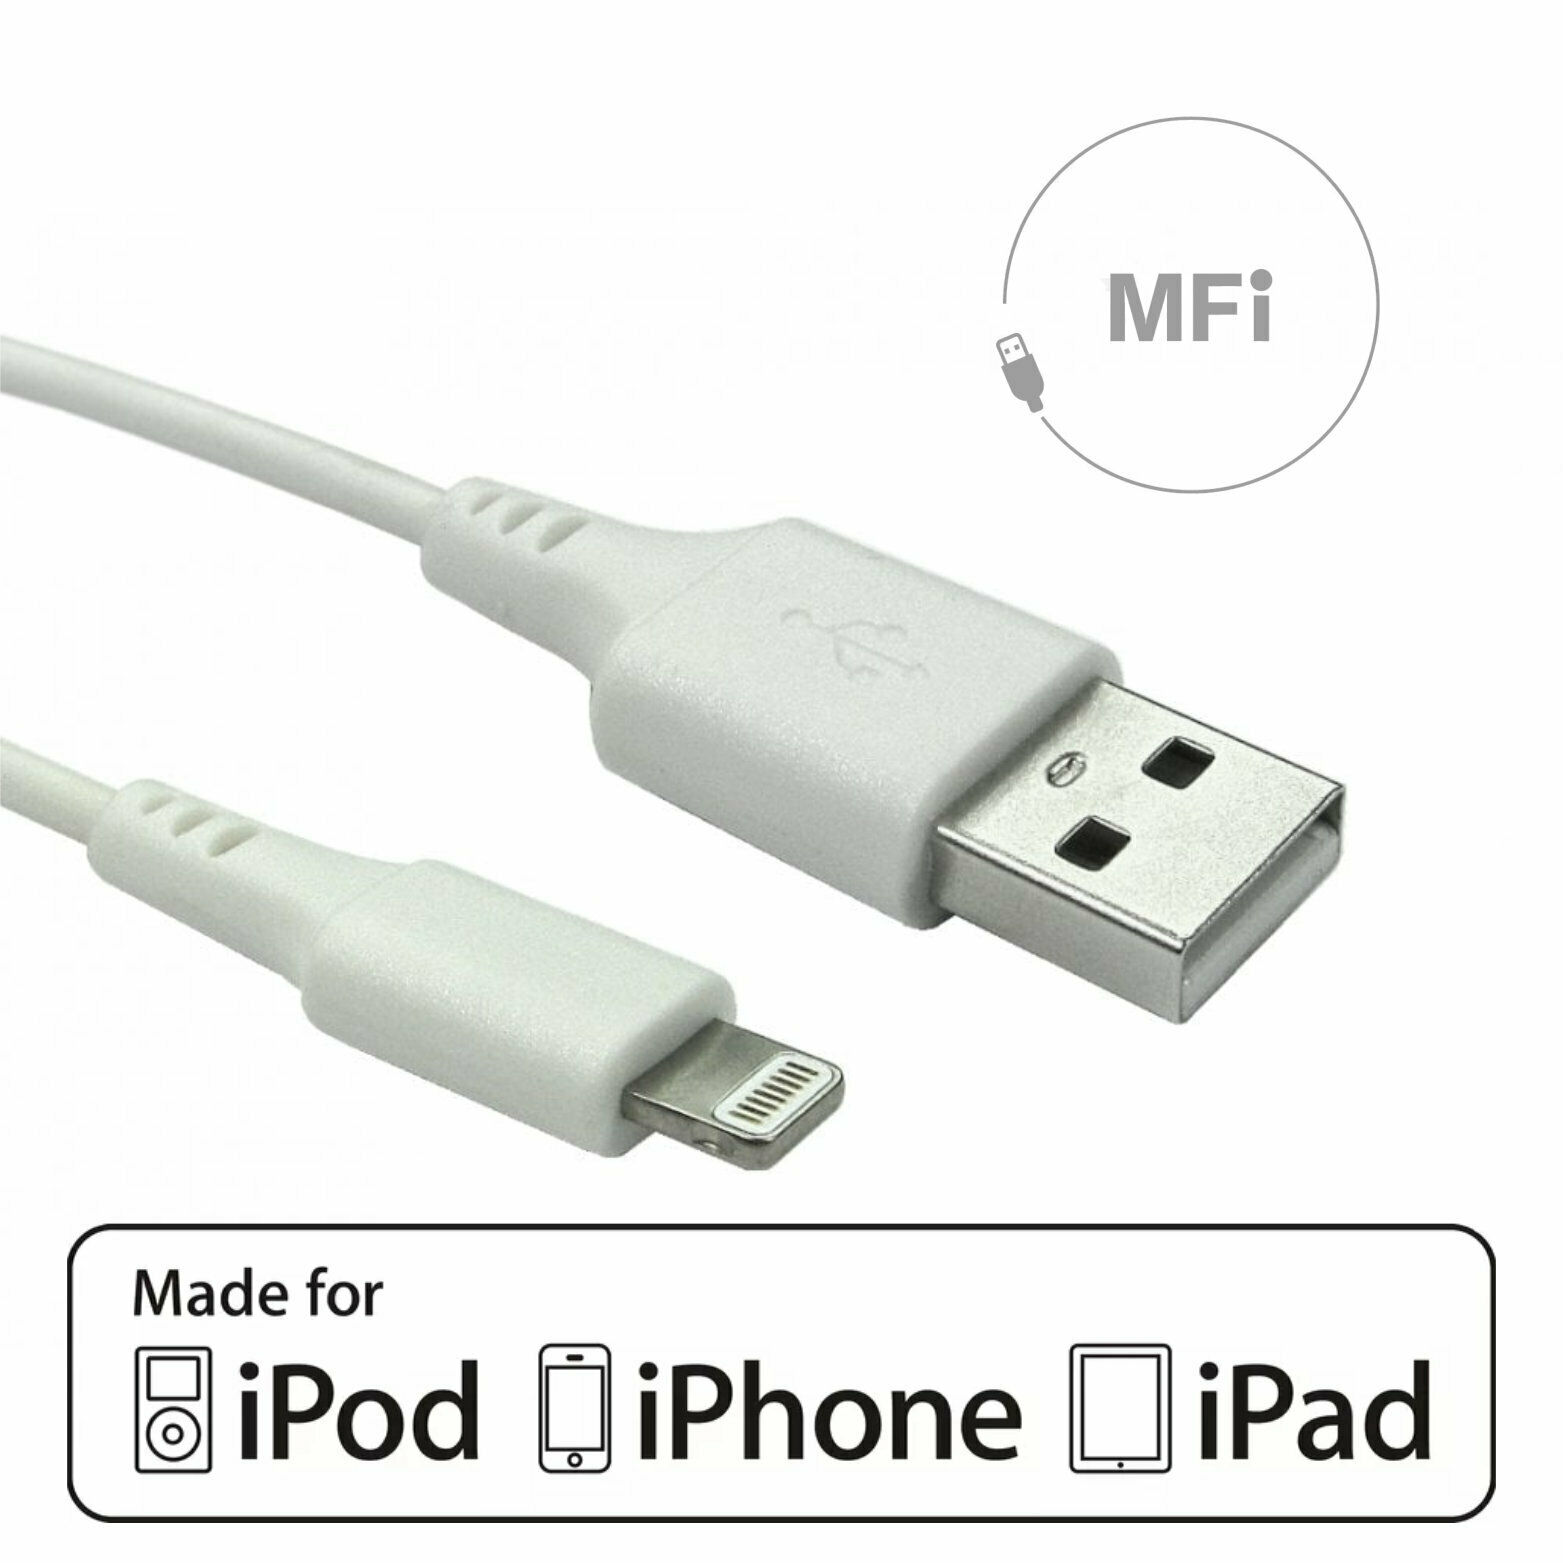 referee Playground equipment Eyesight MFI Certified USB Lightning Charger Cable For iPhone & iPad -  rhinocables.co.uk